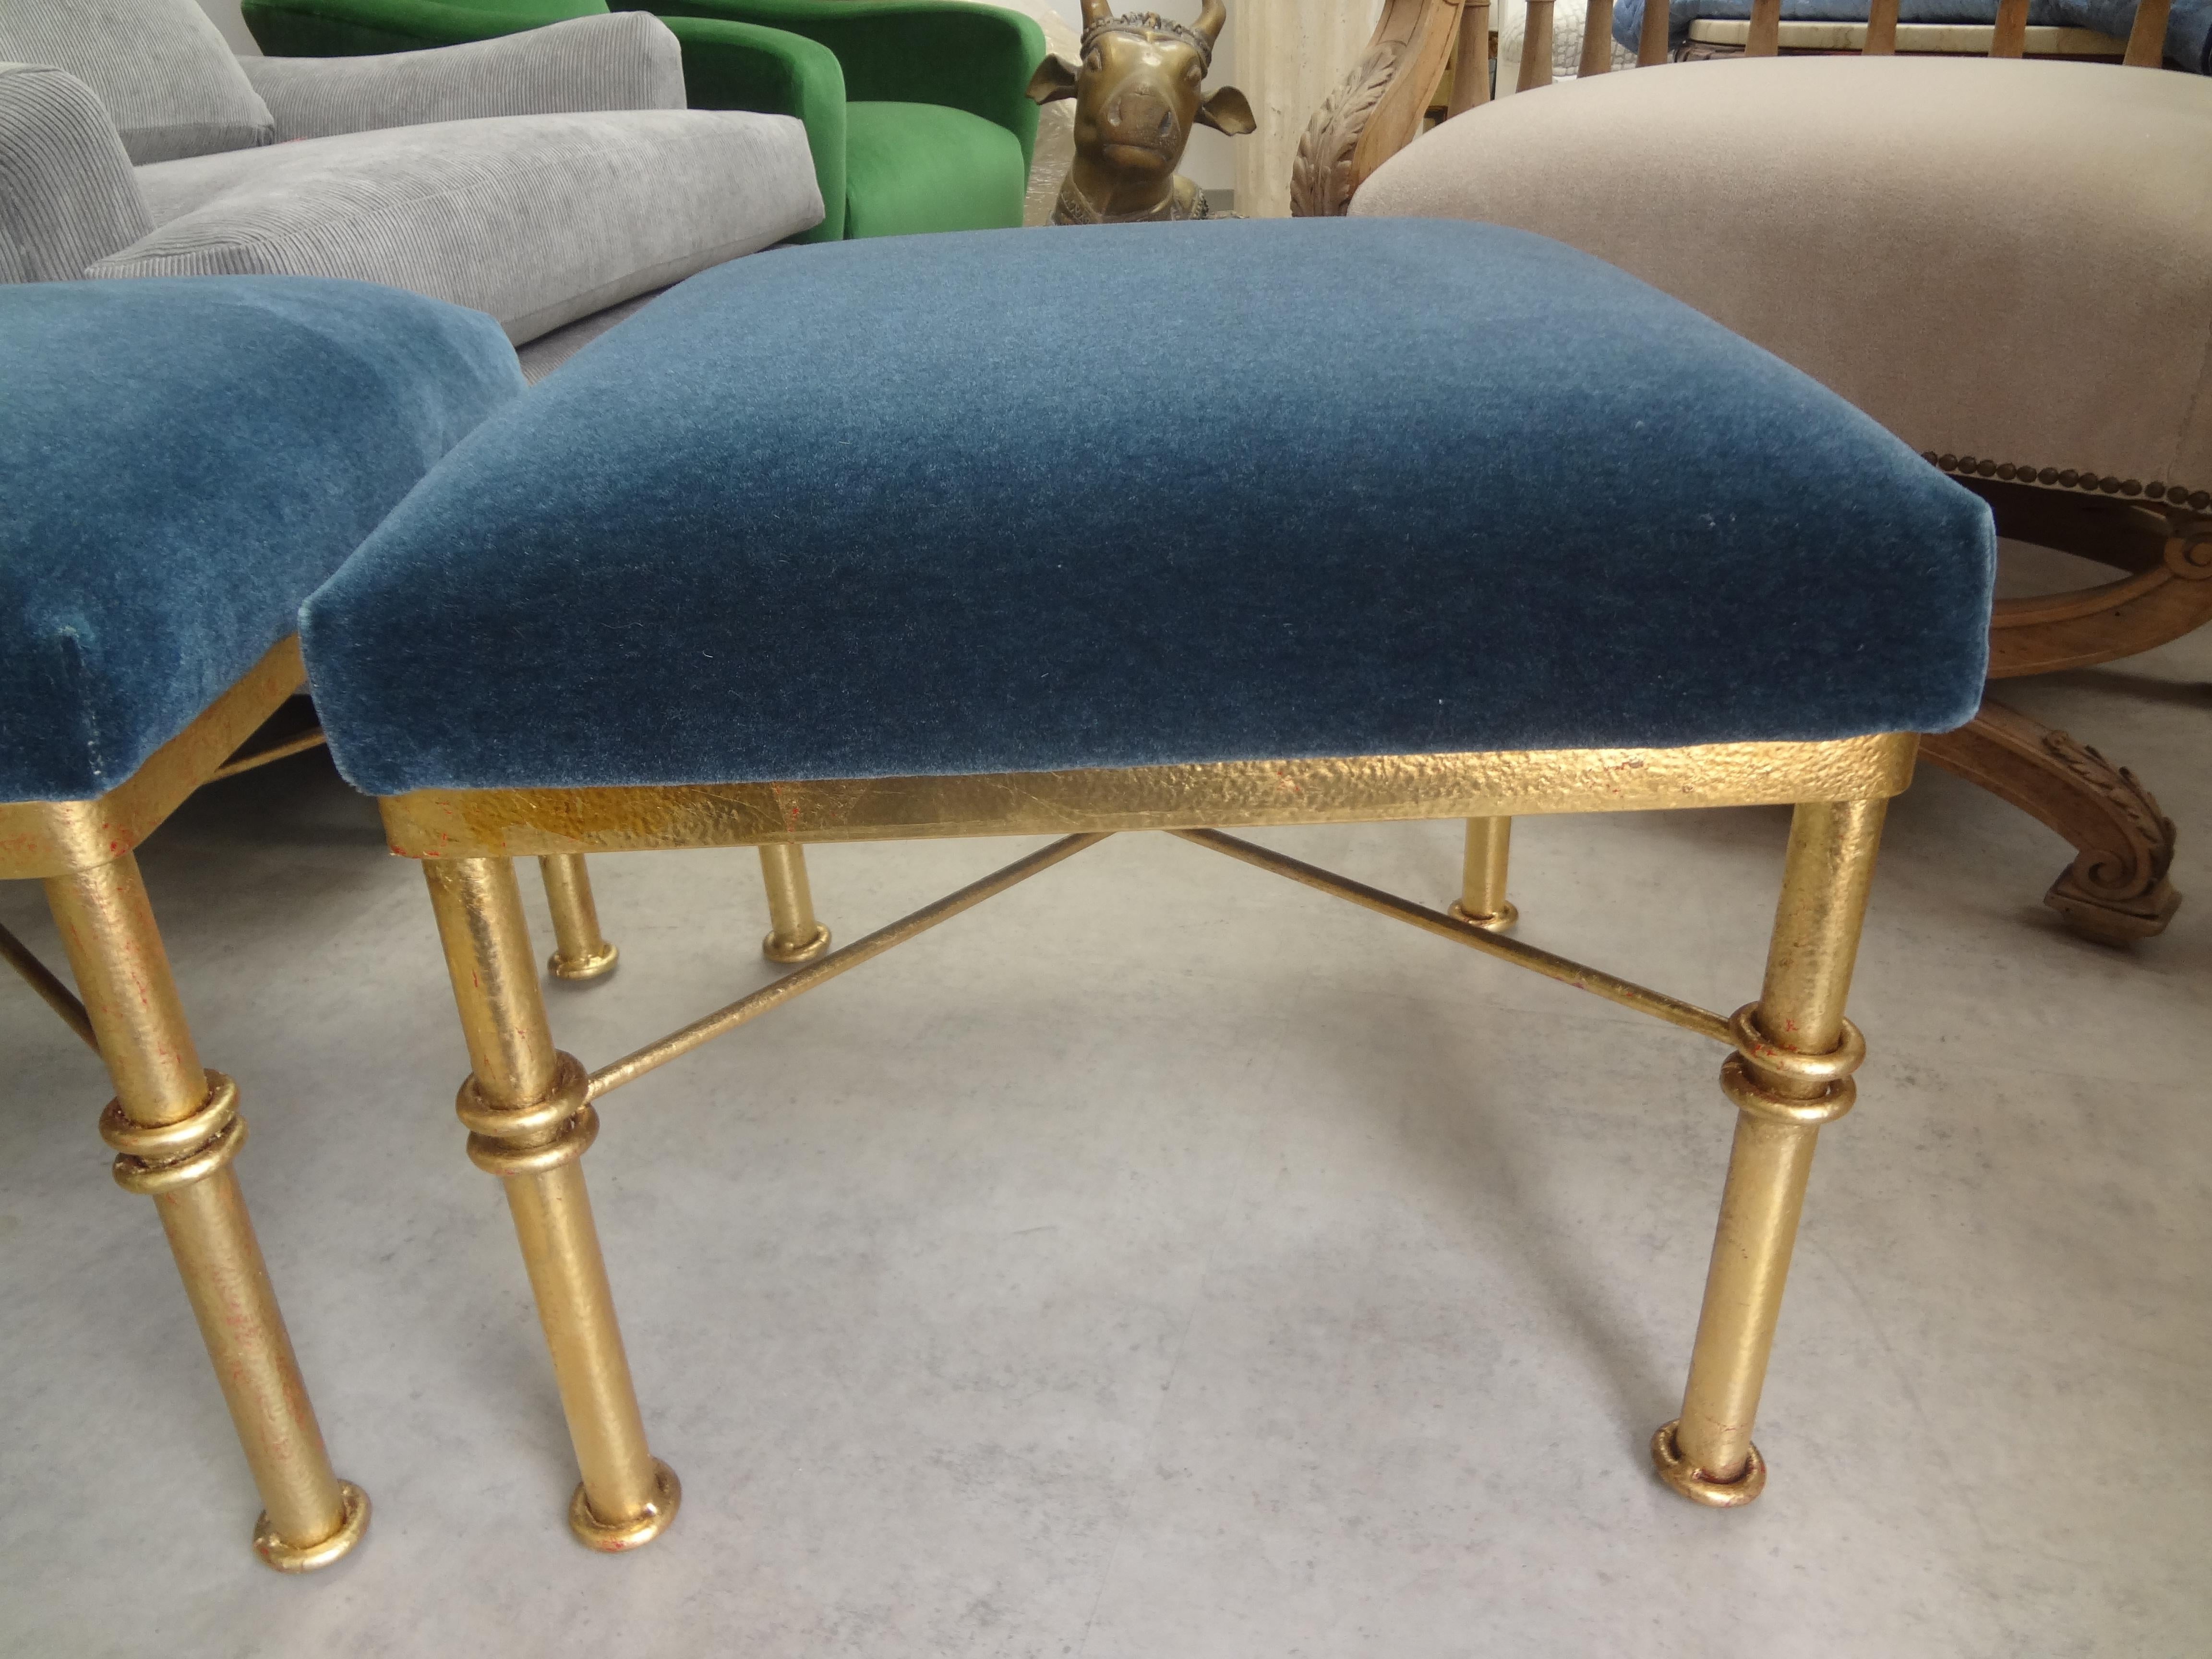 Pair of midcentury gilt iron ottomans. This beautiful pair of gilt ottomans, benches or stools with a knot design were taken down to the frame
and newly upholstered in steel blue mohair. Versatile pair!